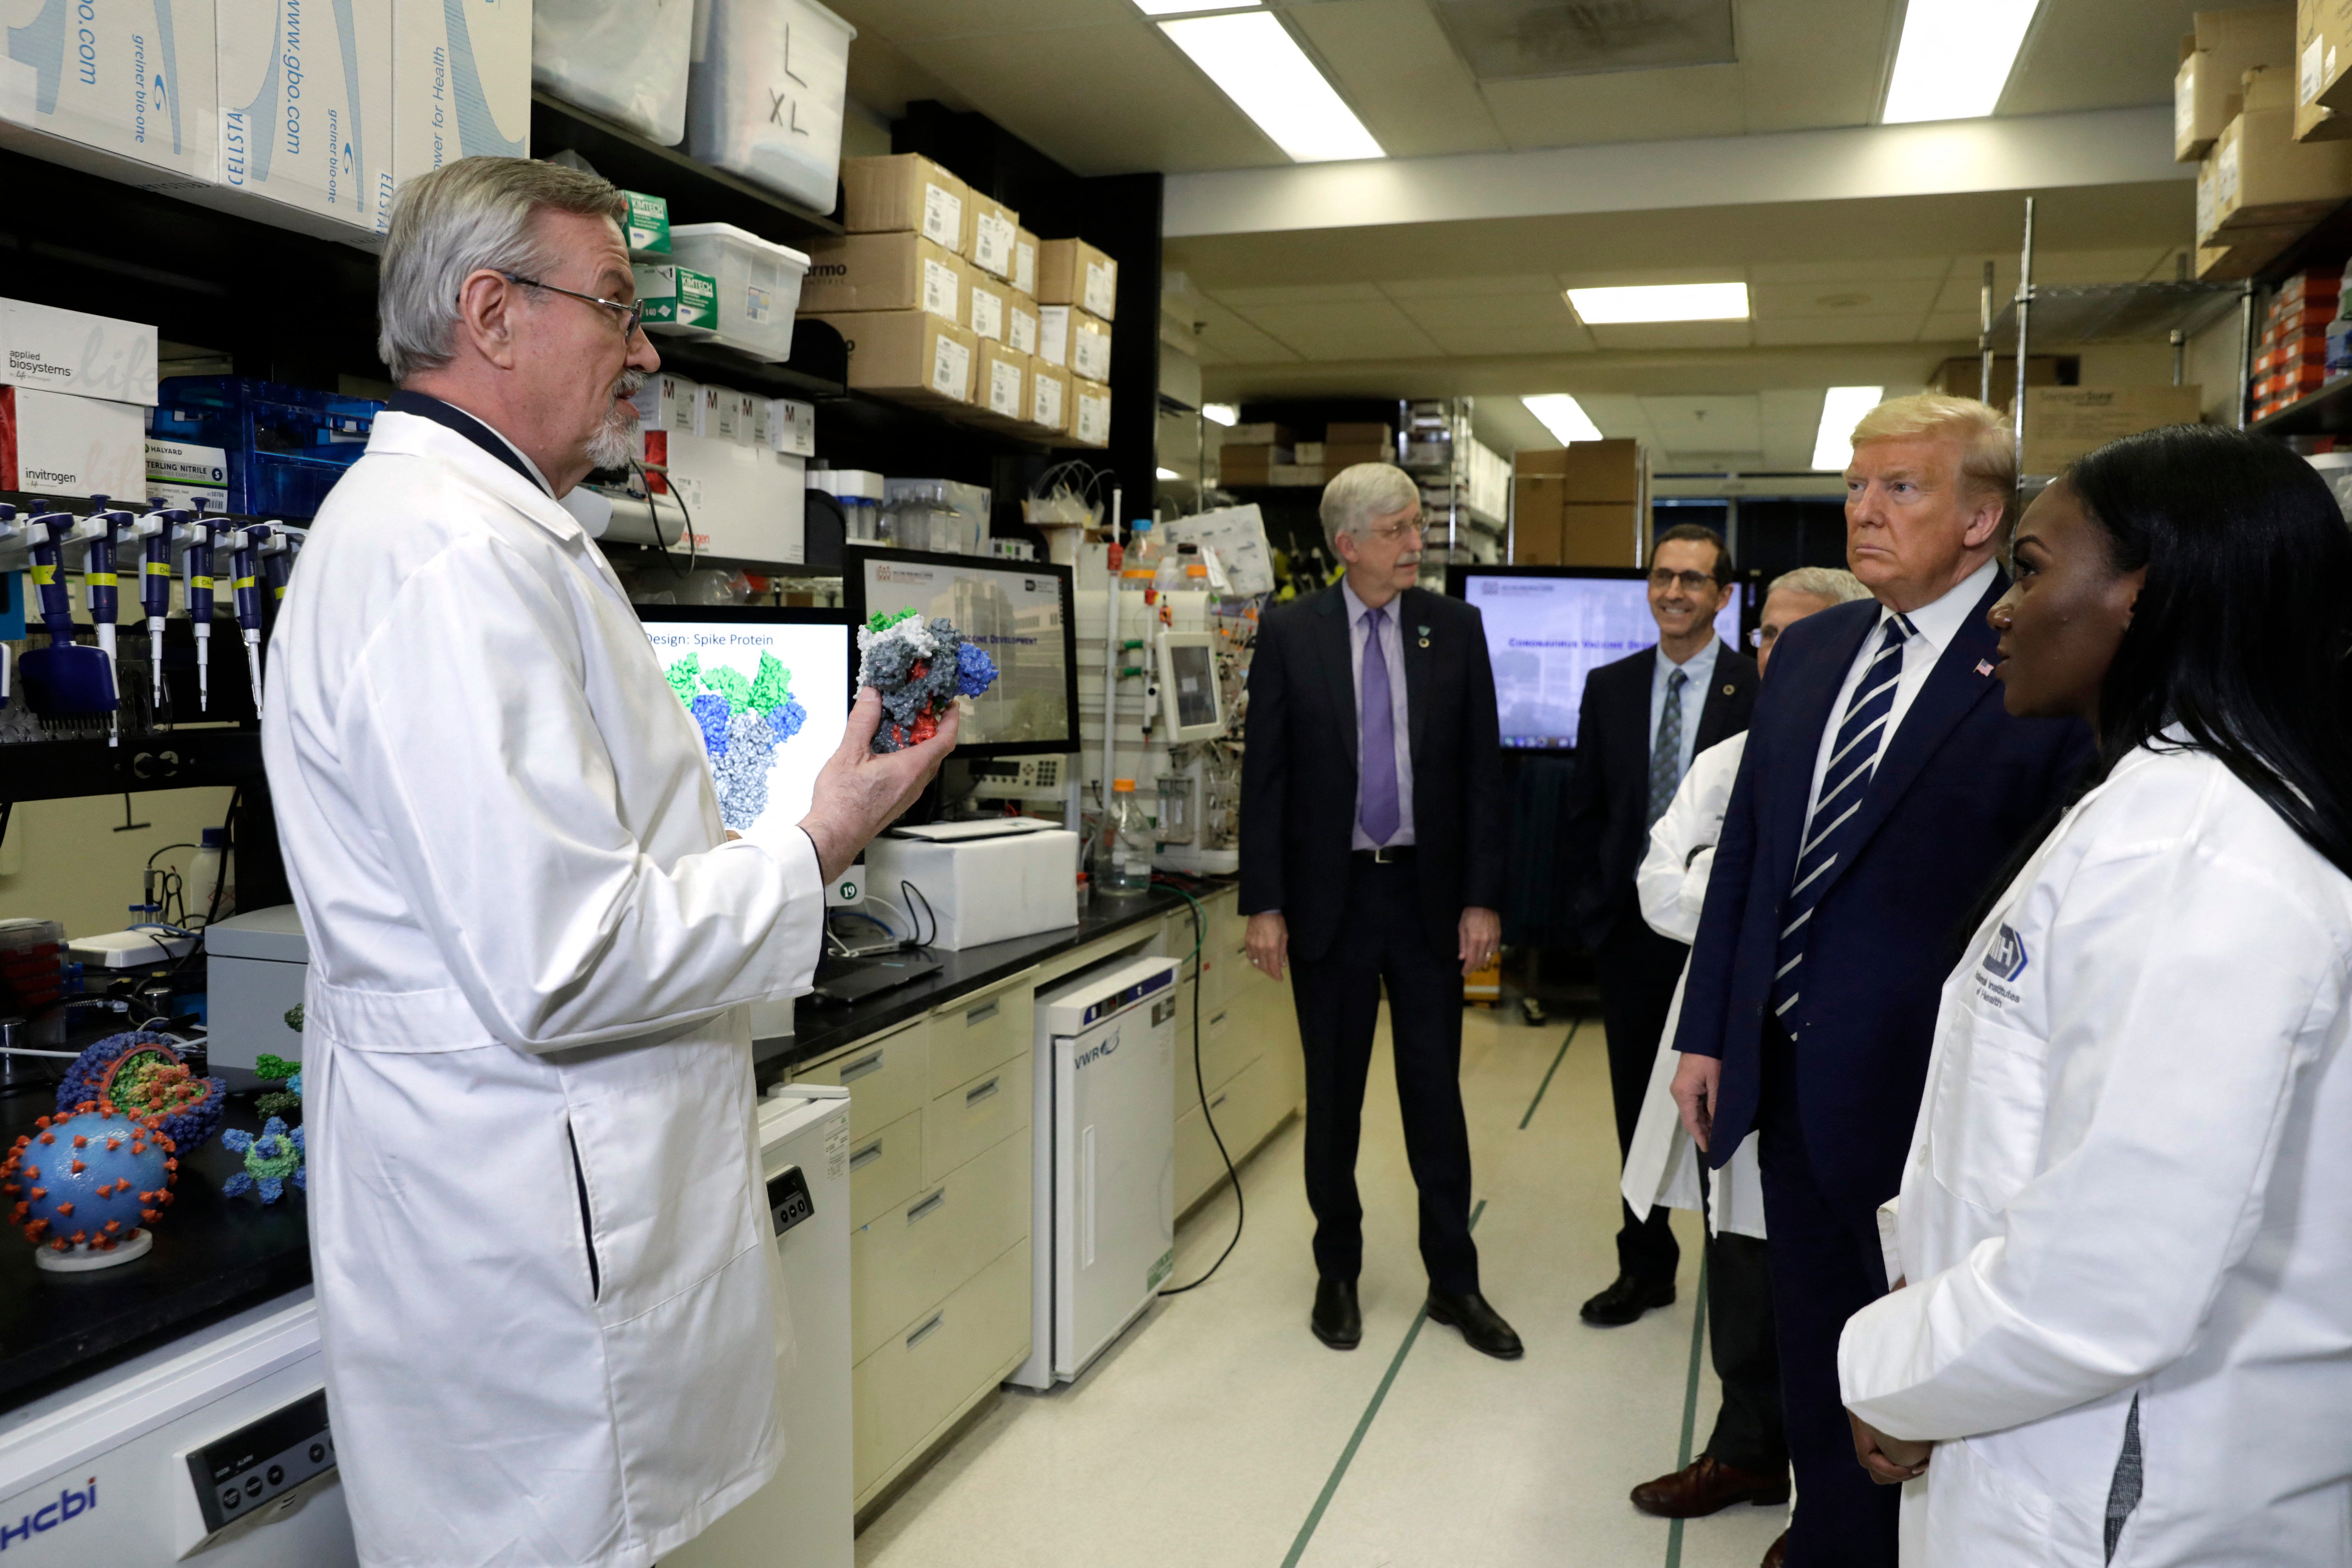 President Donald Trump tours the NIH's Health Vaccine Research Center on March 3, 2020 with Barney Graham, left, and Kizzmekia Corbett, right.